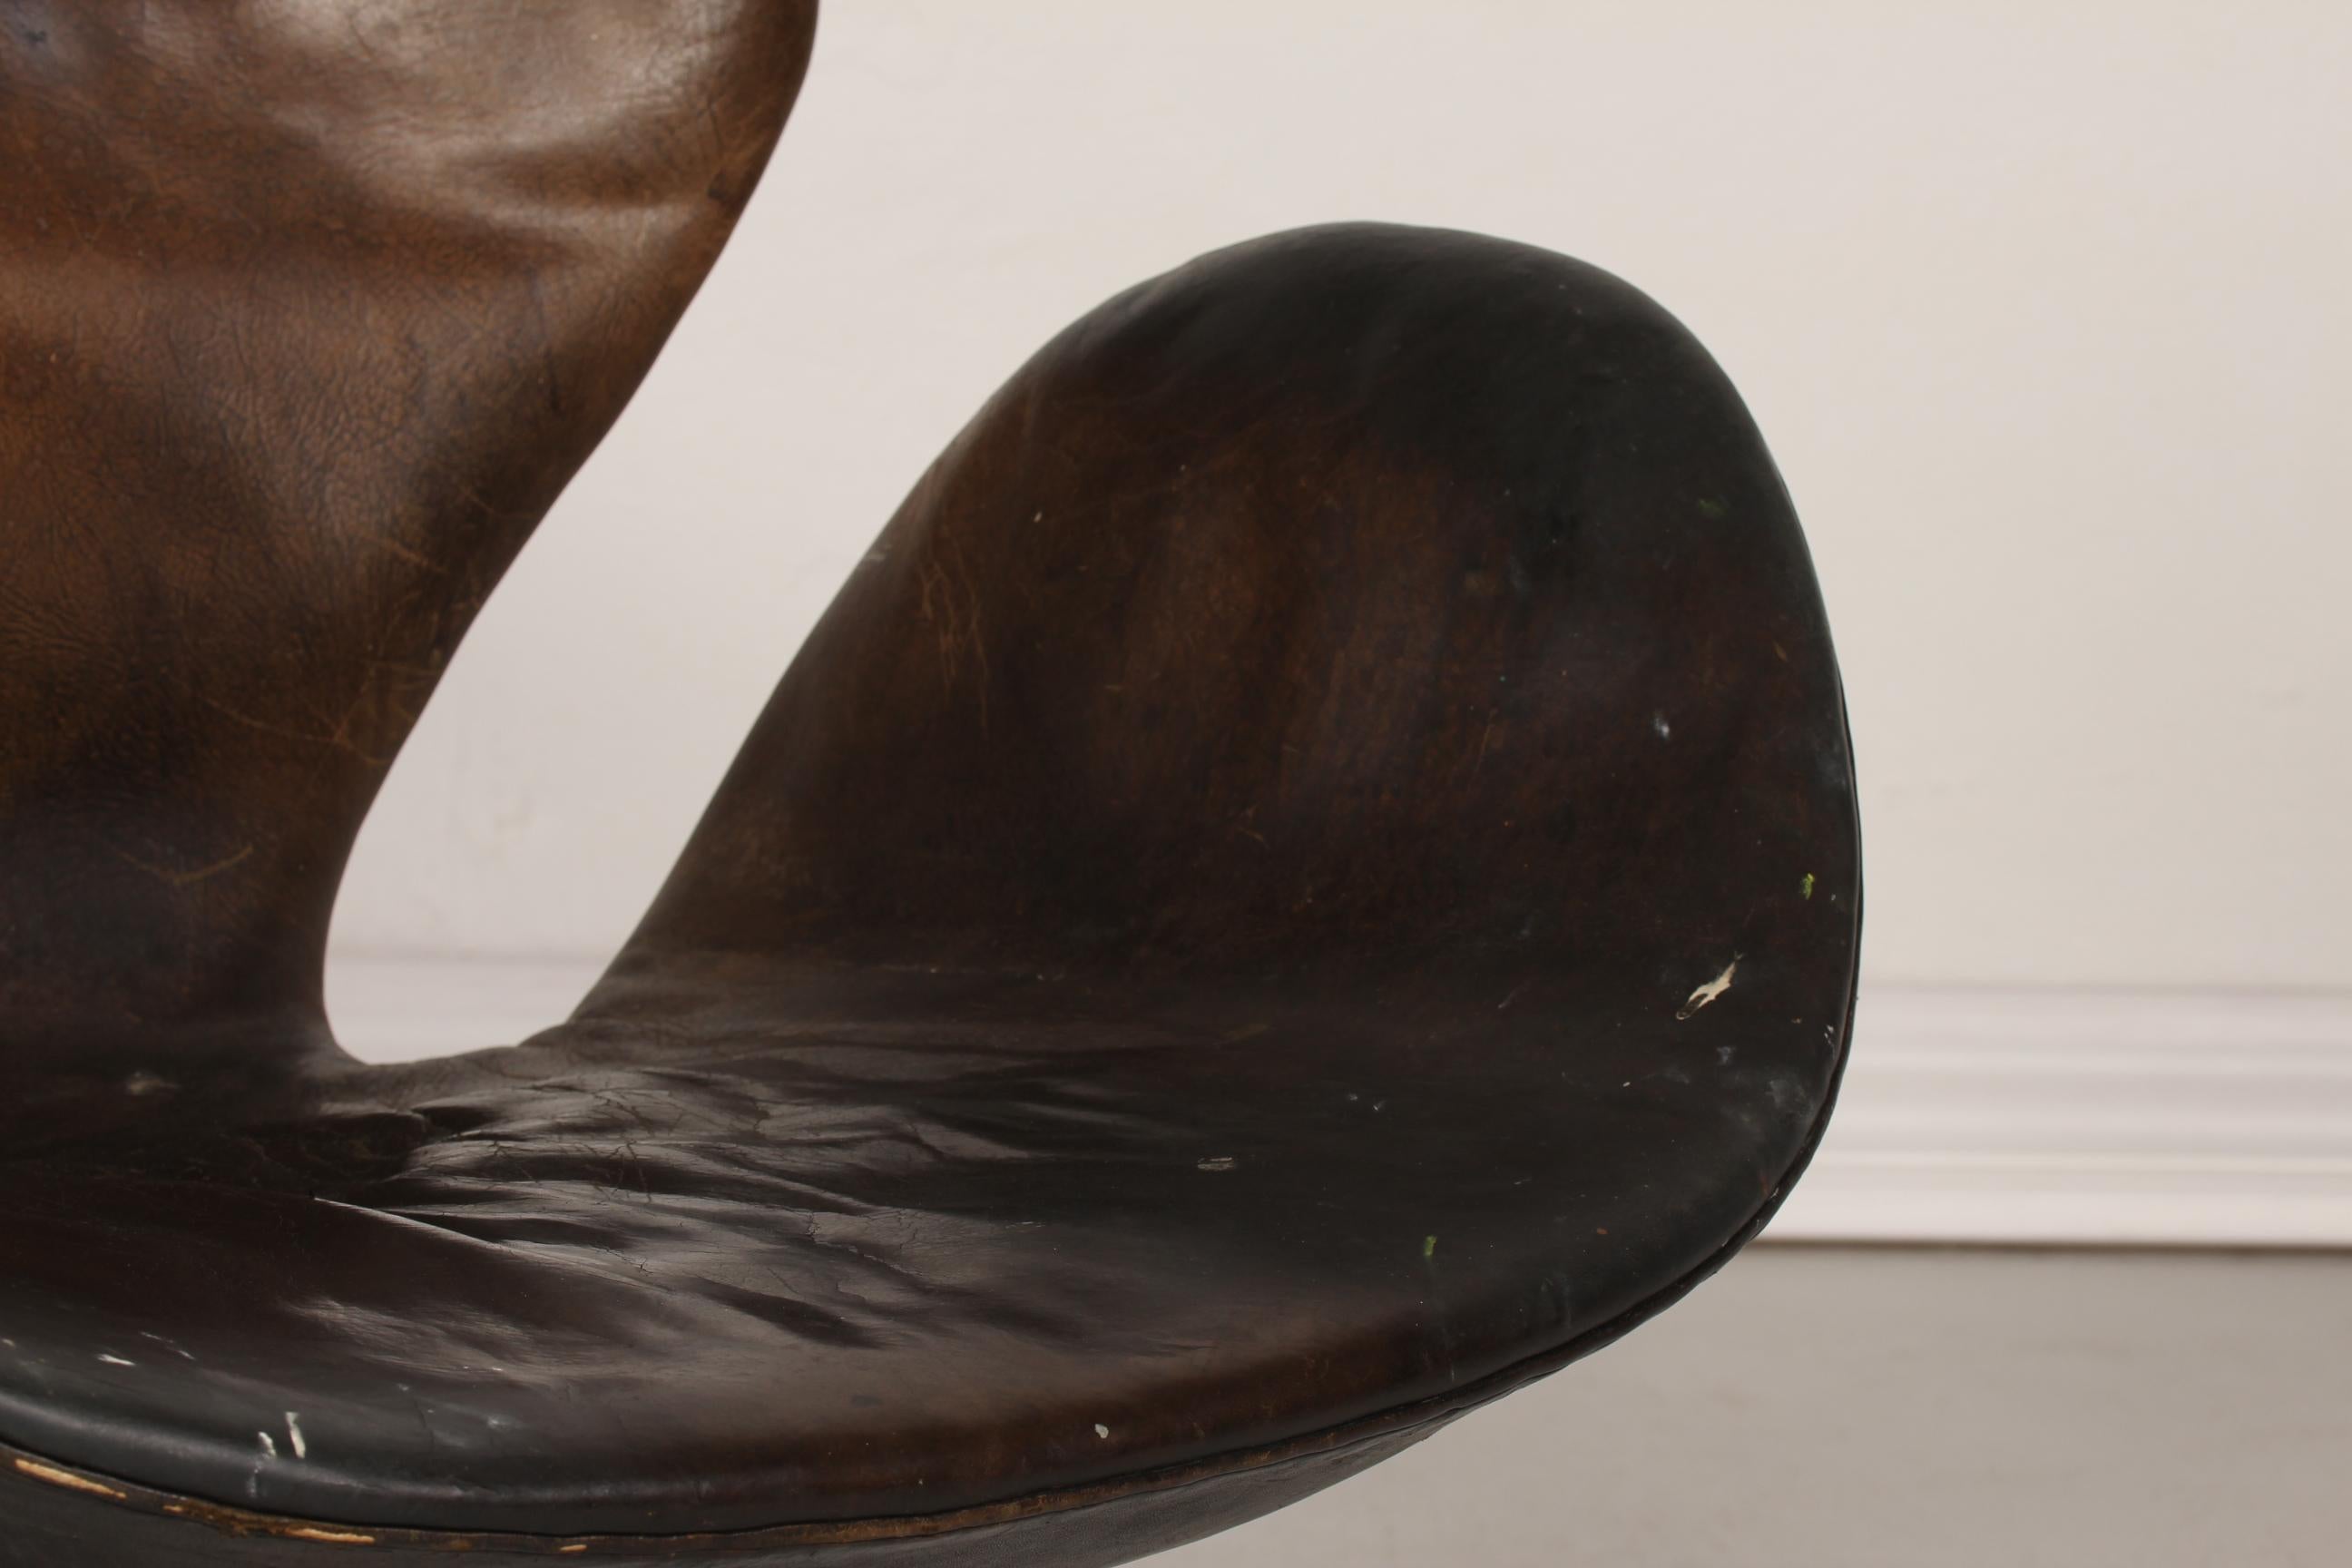 Mid-20th Century Original 1960s Arne Jacobsen Black Leather Swan Chair 3320 with Heavy Patina